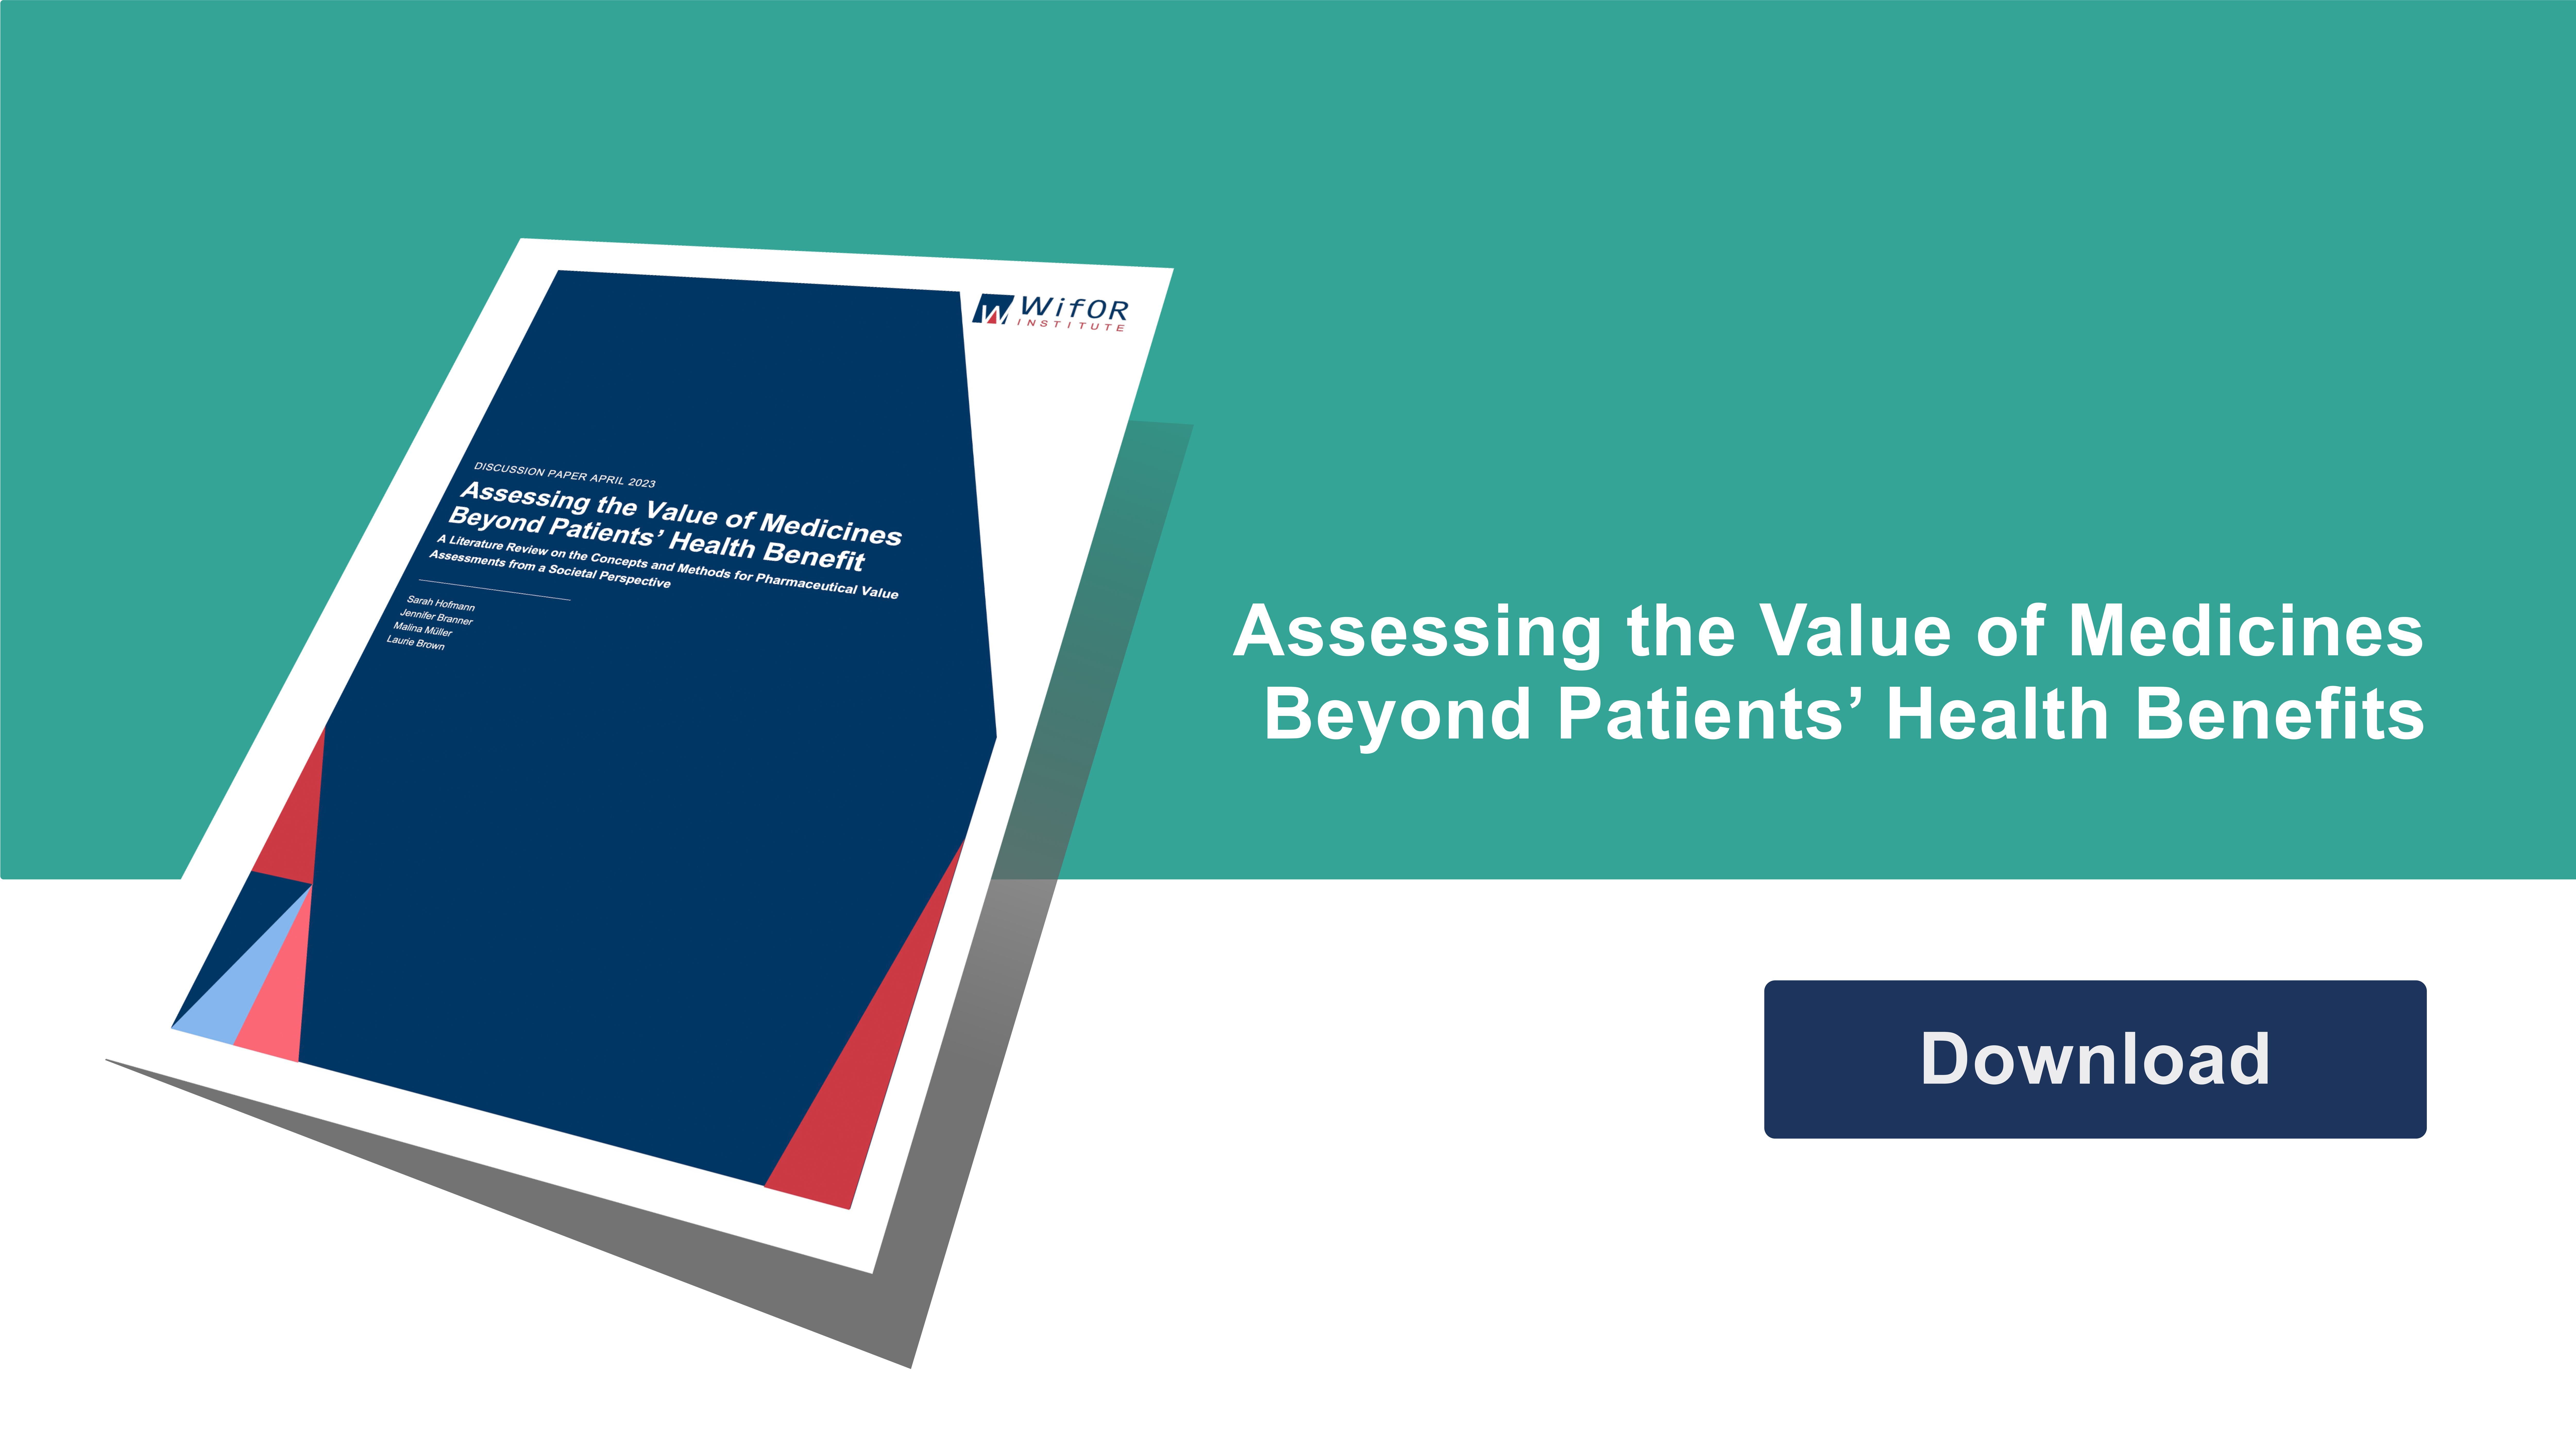 Assessing the Value of Medicines Beyond Patients' Health Benefits